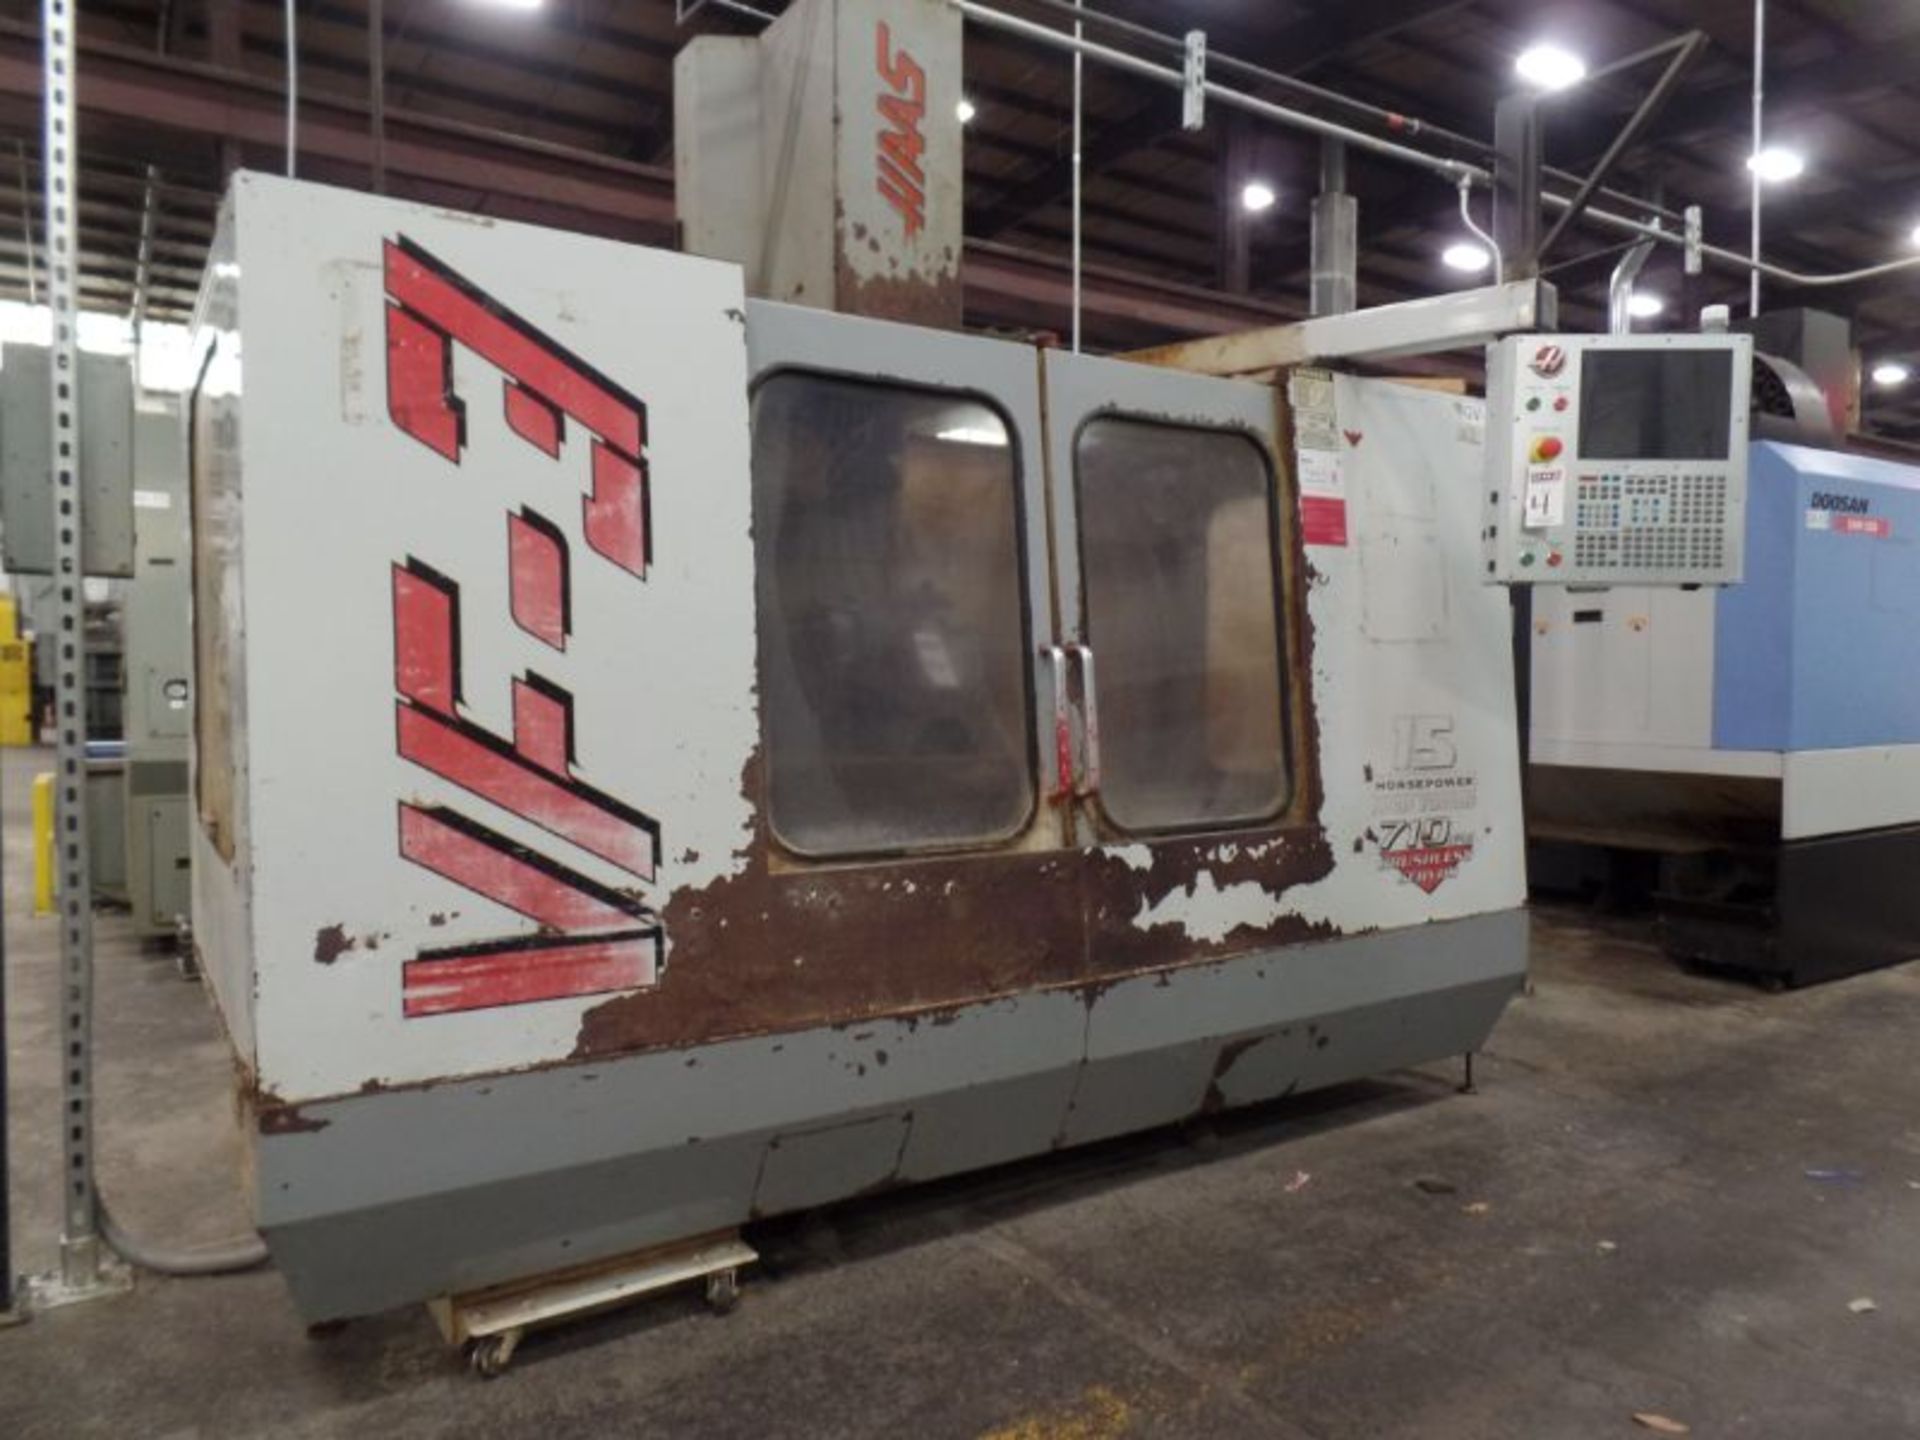 Haas VF-3, Retro’d control, 40”x 20”x 20” Travels, CT40, New 1997 *Indexer Sold Separate* - Image 2 of 9